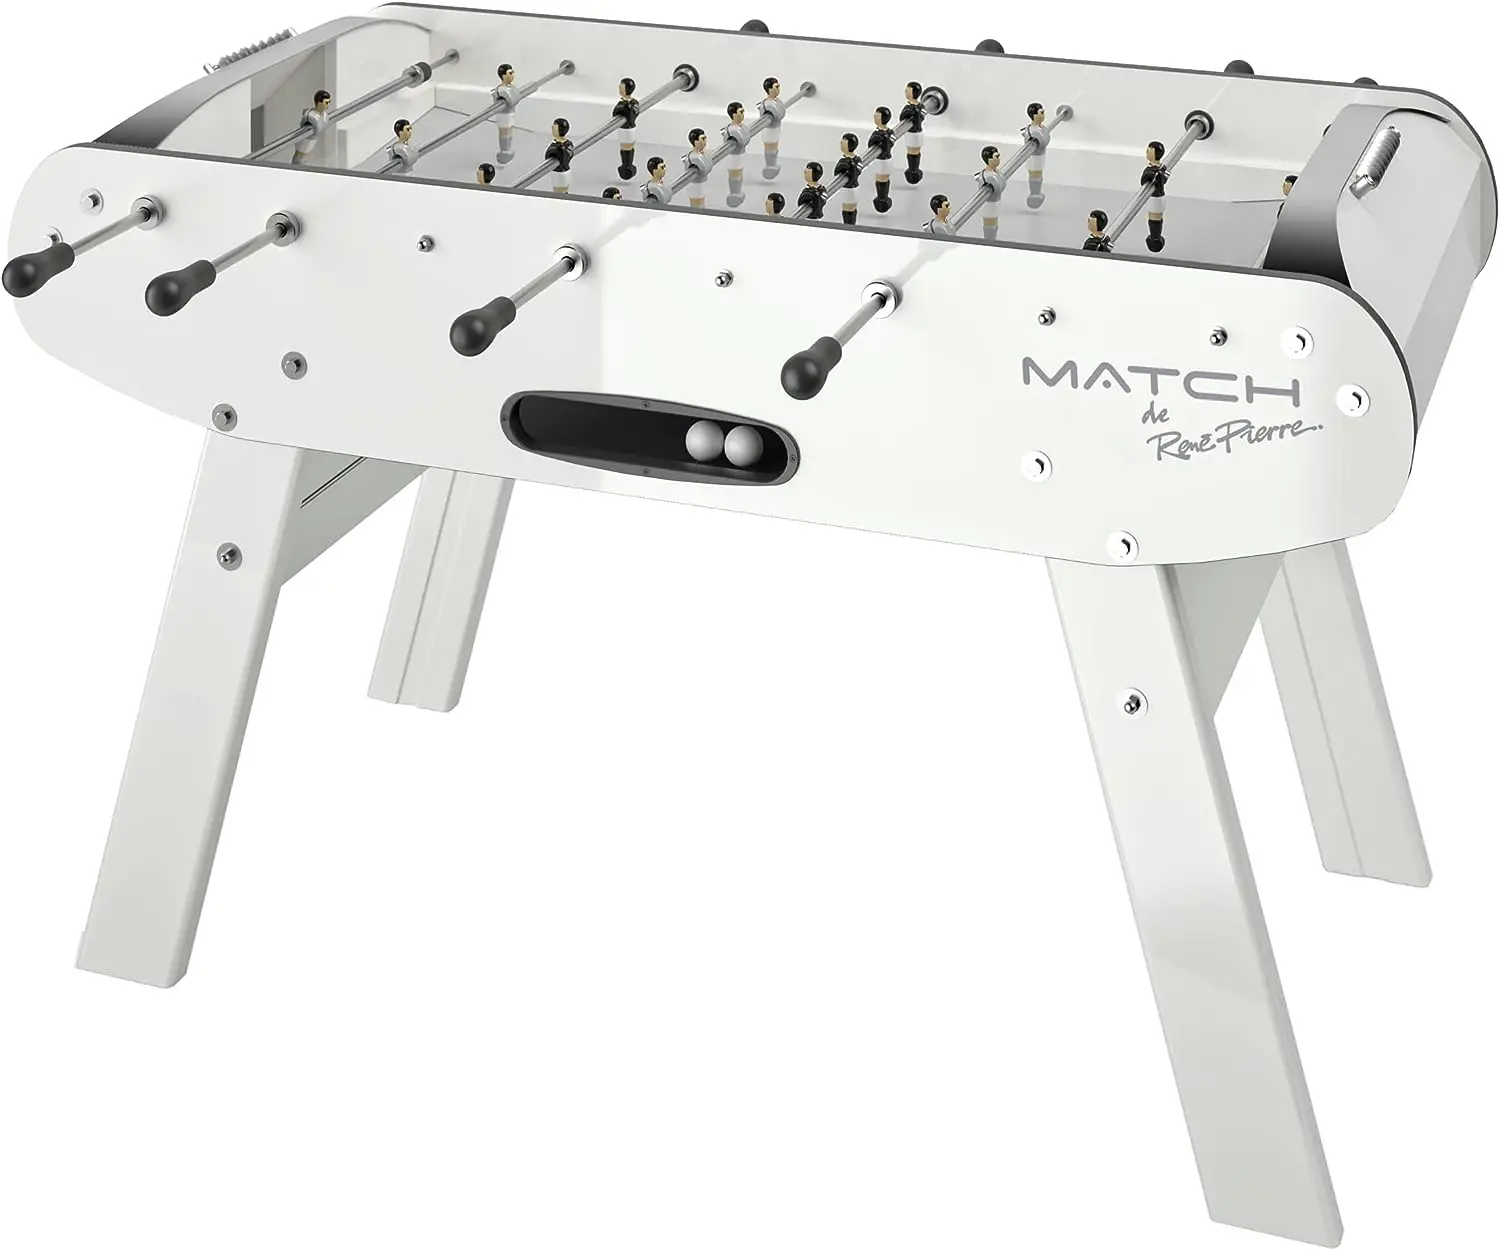 Rene Pierre Match Blanc Foosball Table Made in France Review